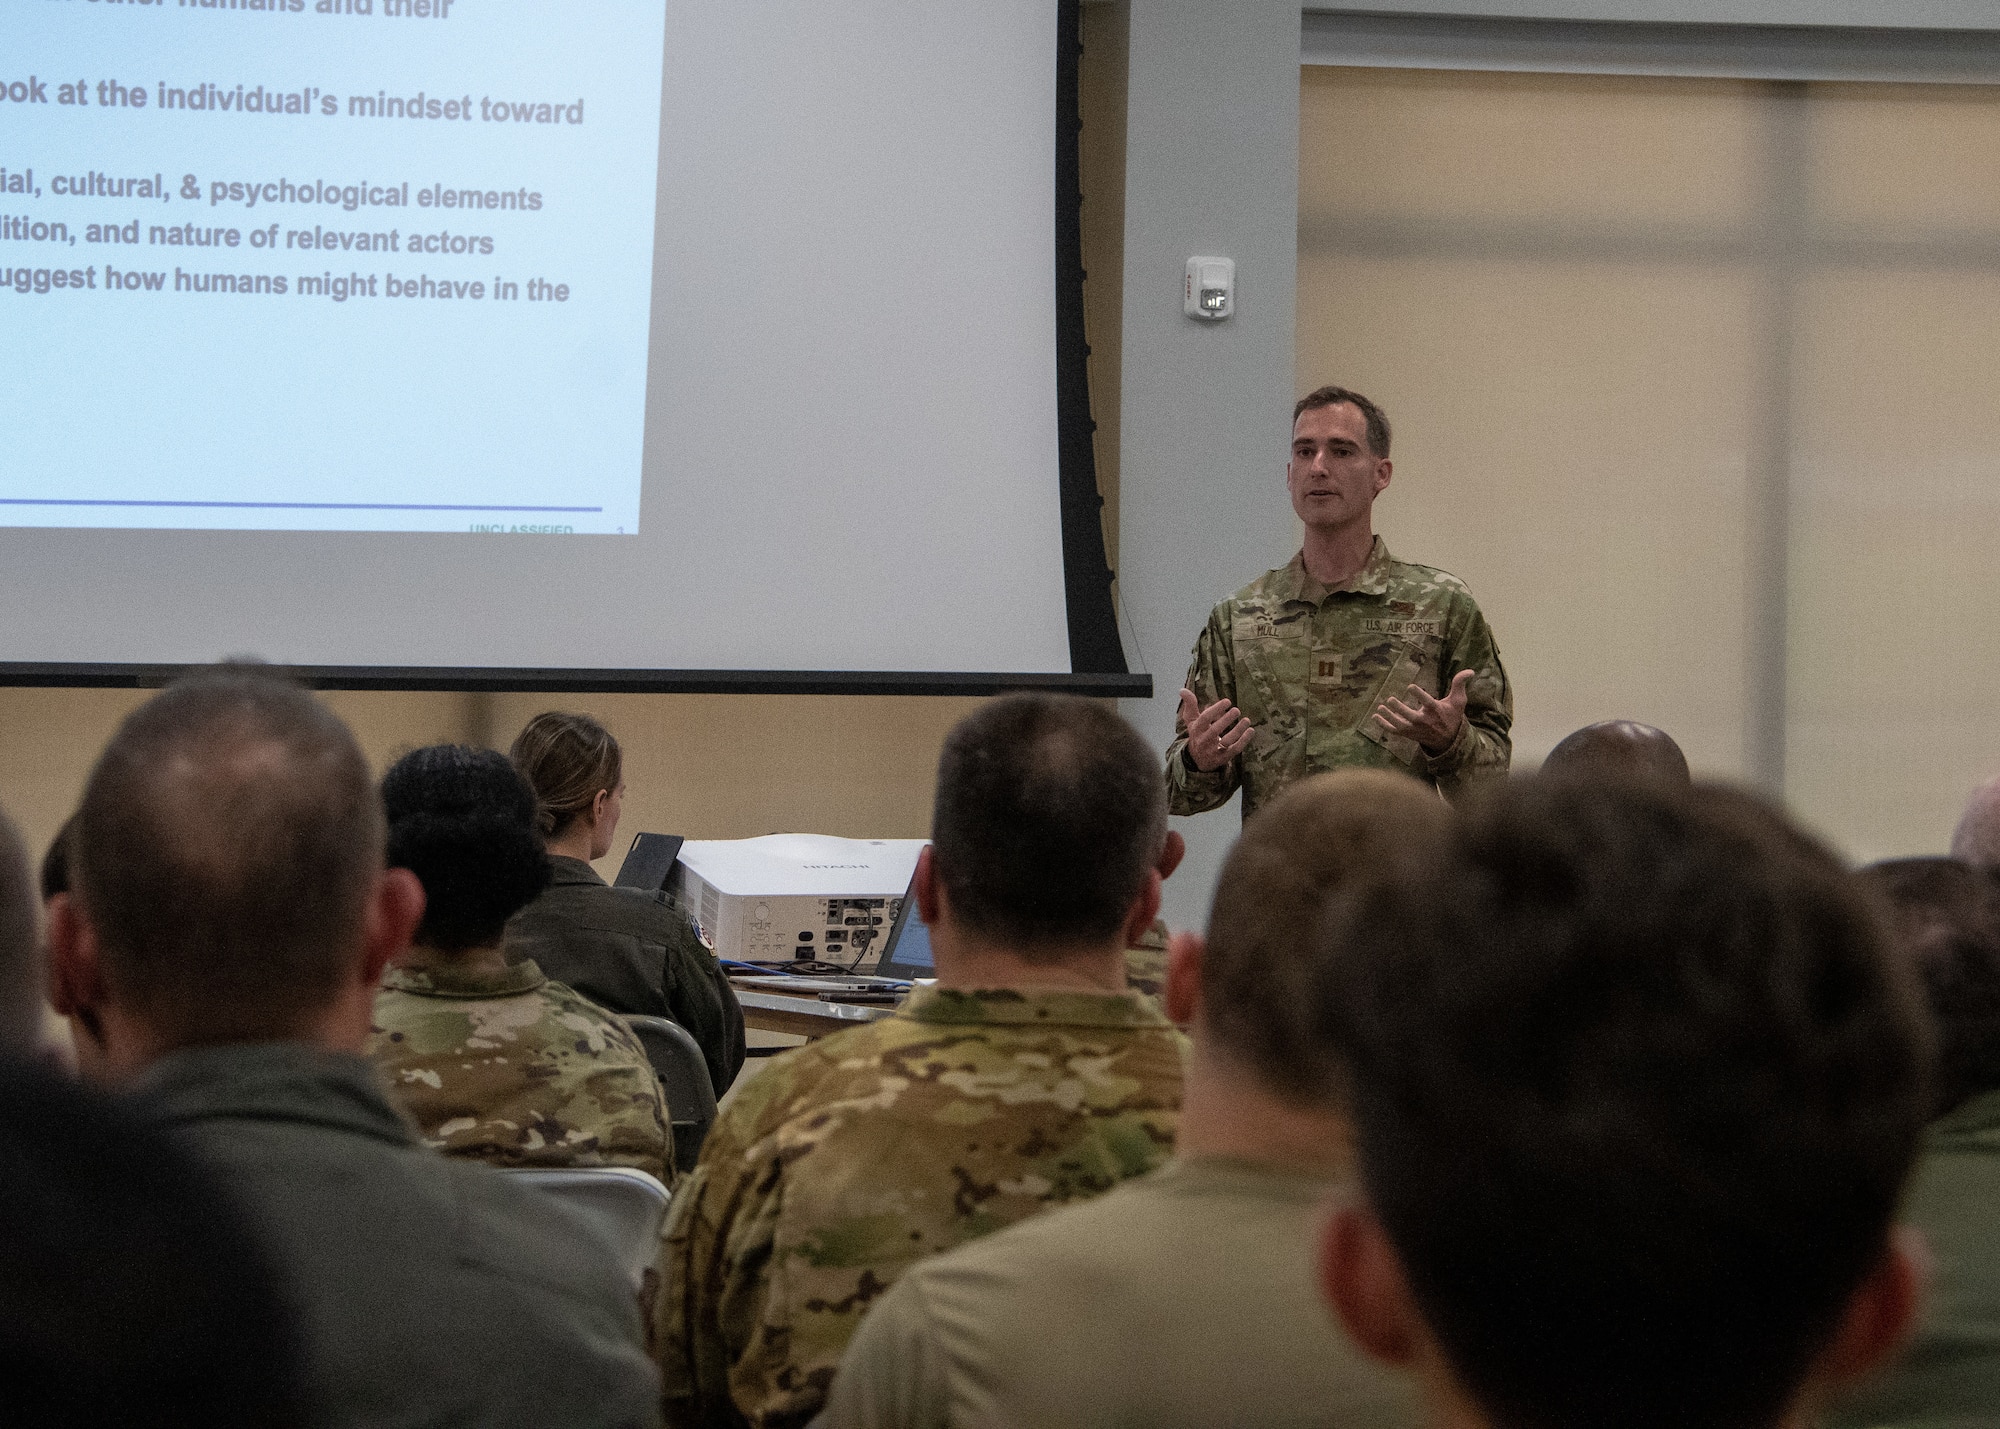 As part of readiness training, Capt. Casey Mull, deputy chief of public affairs for the 94th Airlift Wing, leads Airmen through a workshop entitled “Combat in the Information Environment” on Sept. 11, 2023, at Dobbins Air Reserve Base, Ga. The training challenged Airmen to expand beyond one source of information gathering to avoid media biases from their preferred platform. (U.S. Air Force photo by Tech. Sgt. Joshua Kincaid)